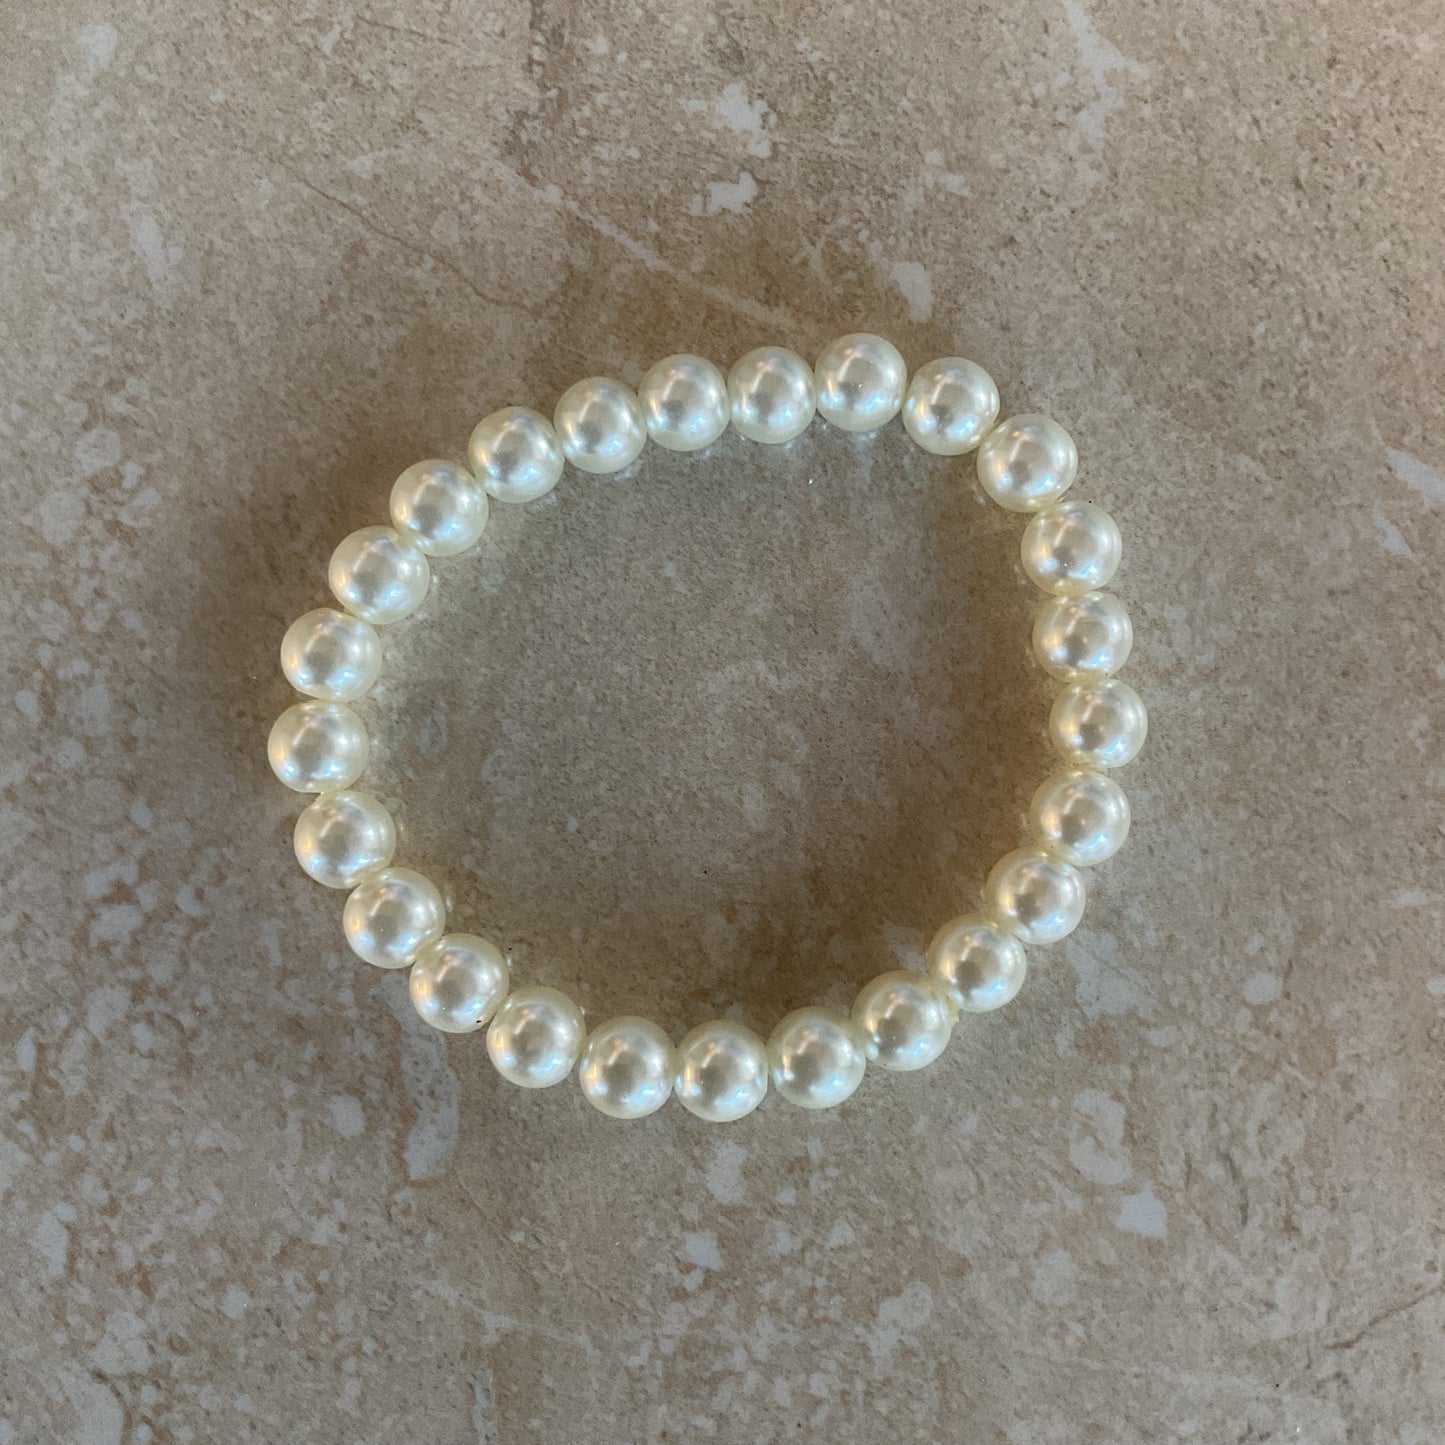 Vintage Glass Pearls Women’s Stretch Bracelet Size 2 inches